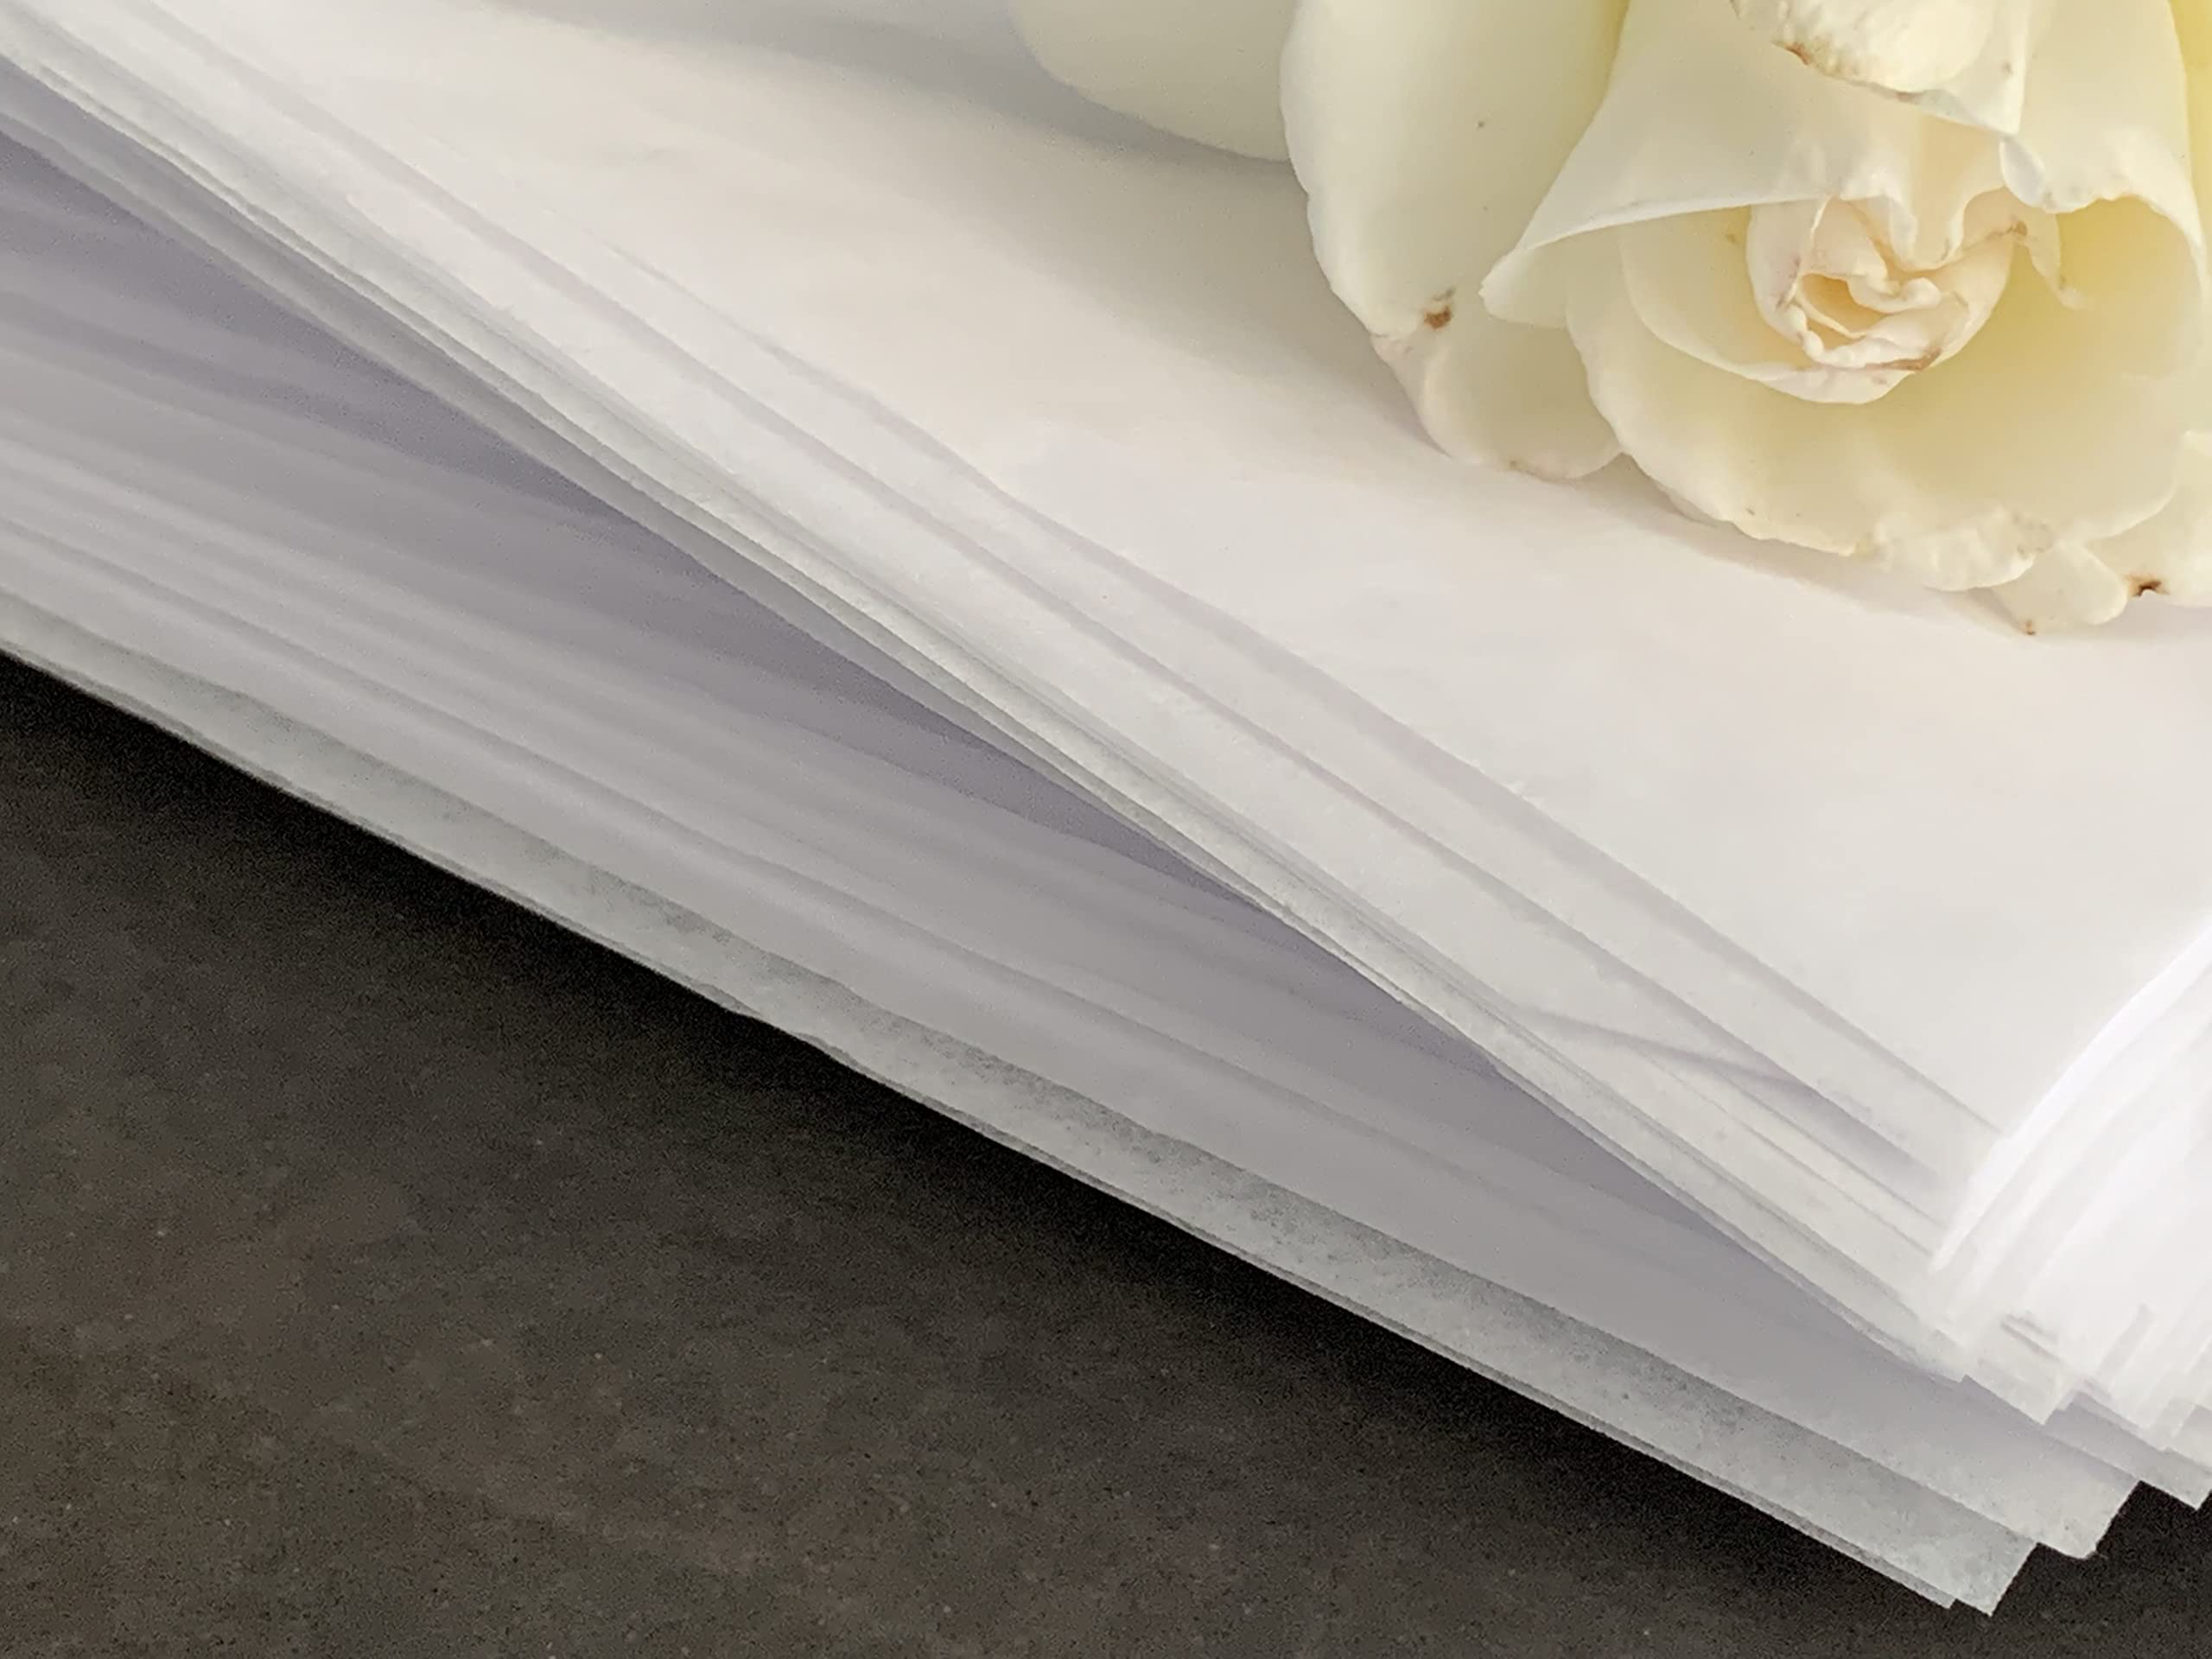 25 Sheets 24 x 36 ; The Linen Lady's Acid Free Archival Tissue Paper - Unbuffered & Lignin Free (25) Protect Your HEIRLOOMS!